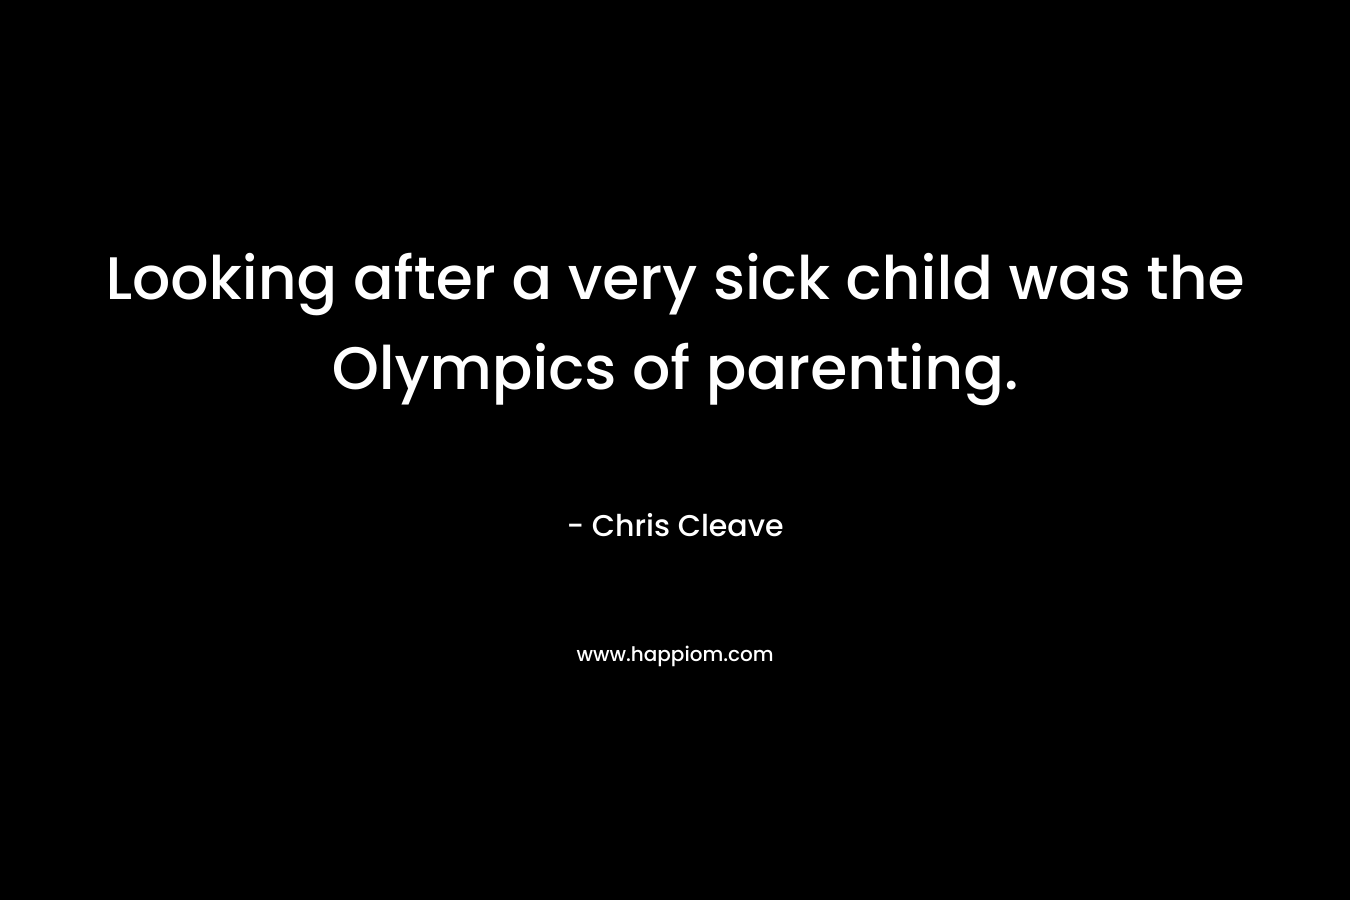 Looking after a very sick child was the Olympics of parenting. – Chris Cleave